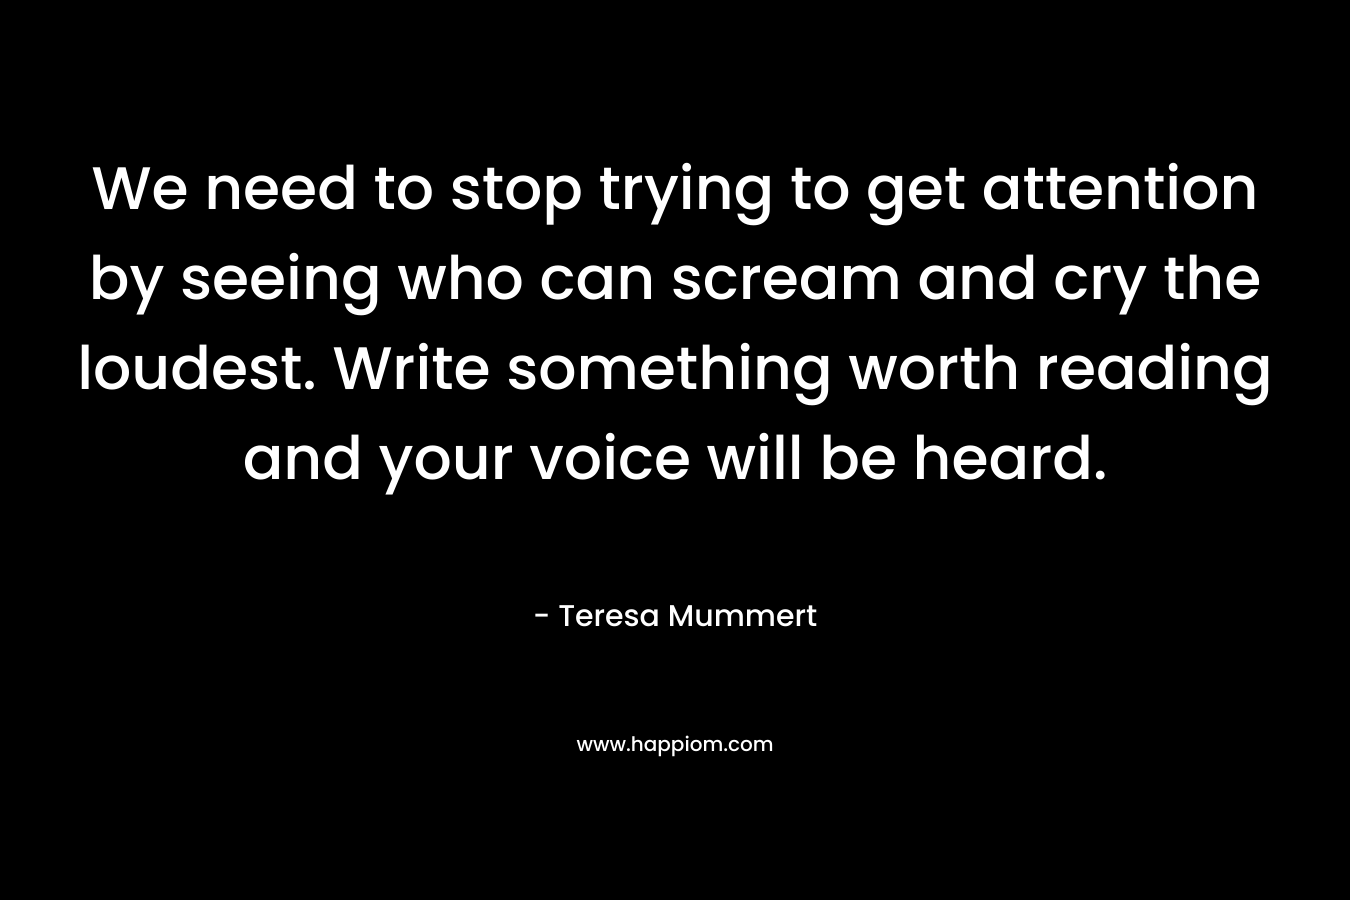 We need to stop trying to get attention by seeing who can scream and cry the loudest. Write something worth reading and your voice will be heard.